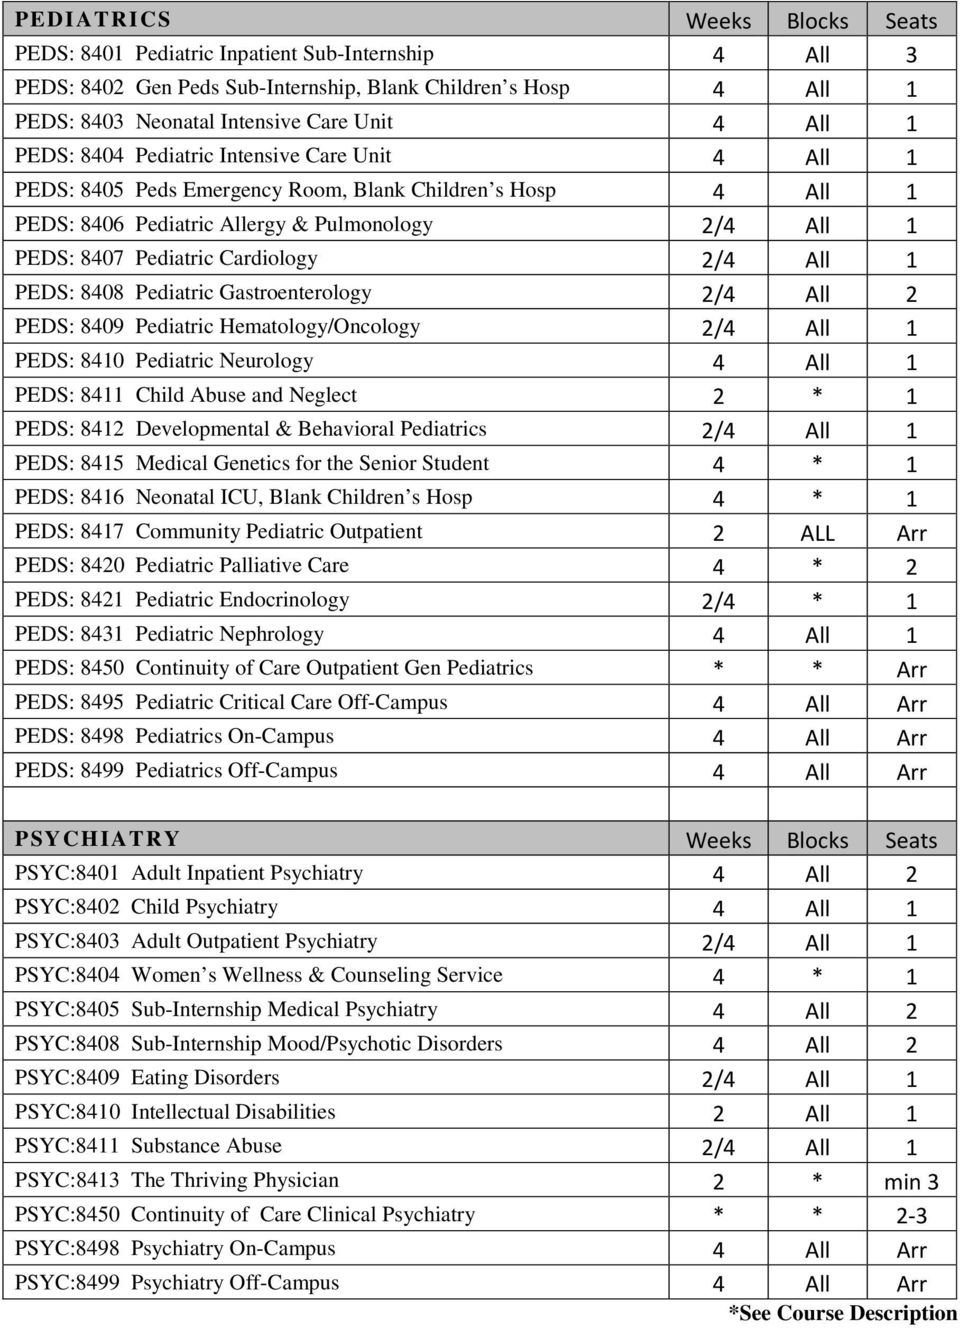 All 1 PEDS: 8408 Pediatric Gastroenterology 2/4 All 2 PEDS: 8409 Pediatric Hematology/Oncology 2/4 All 1 PEDS: 8410 Pediatric Neurology 4 All 1 PEDS: 8411 Child Abuse and Neglect 2 * 1 PEDS: 8412